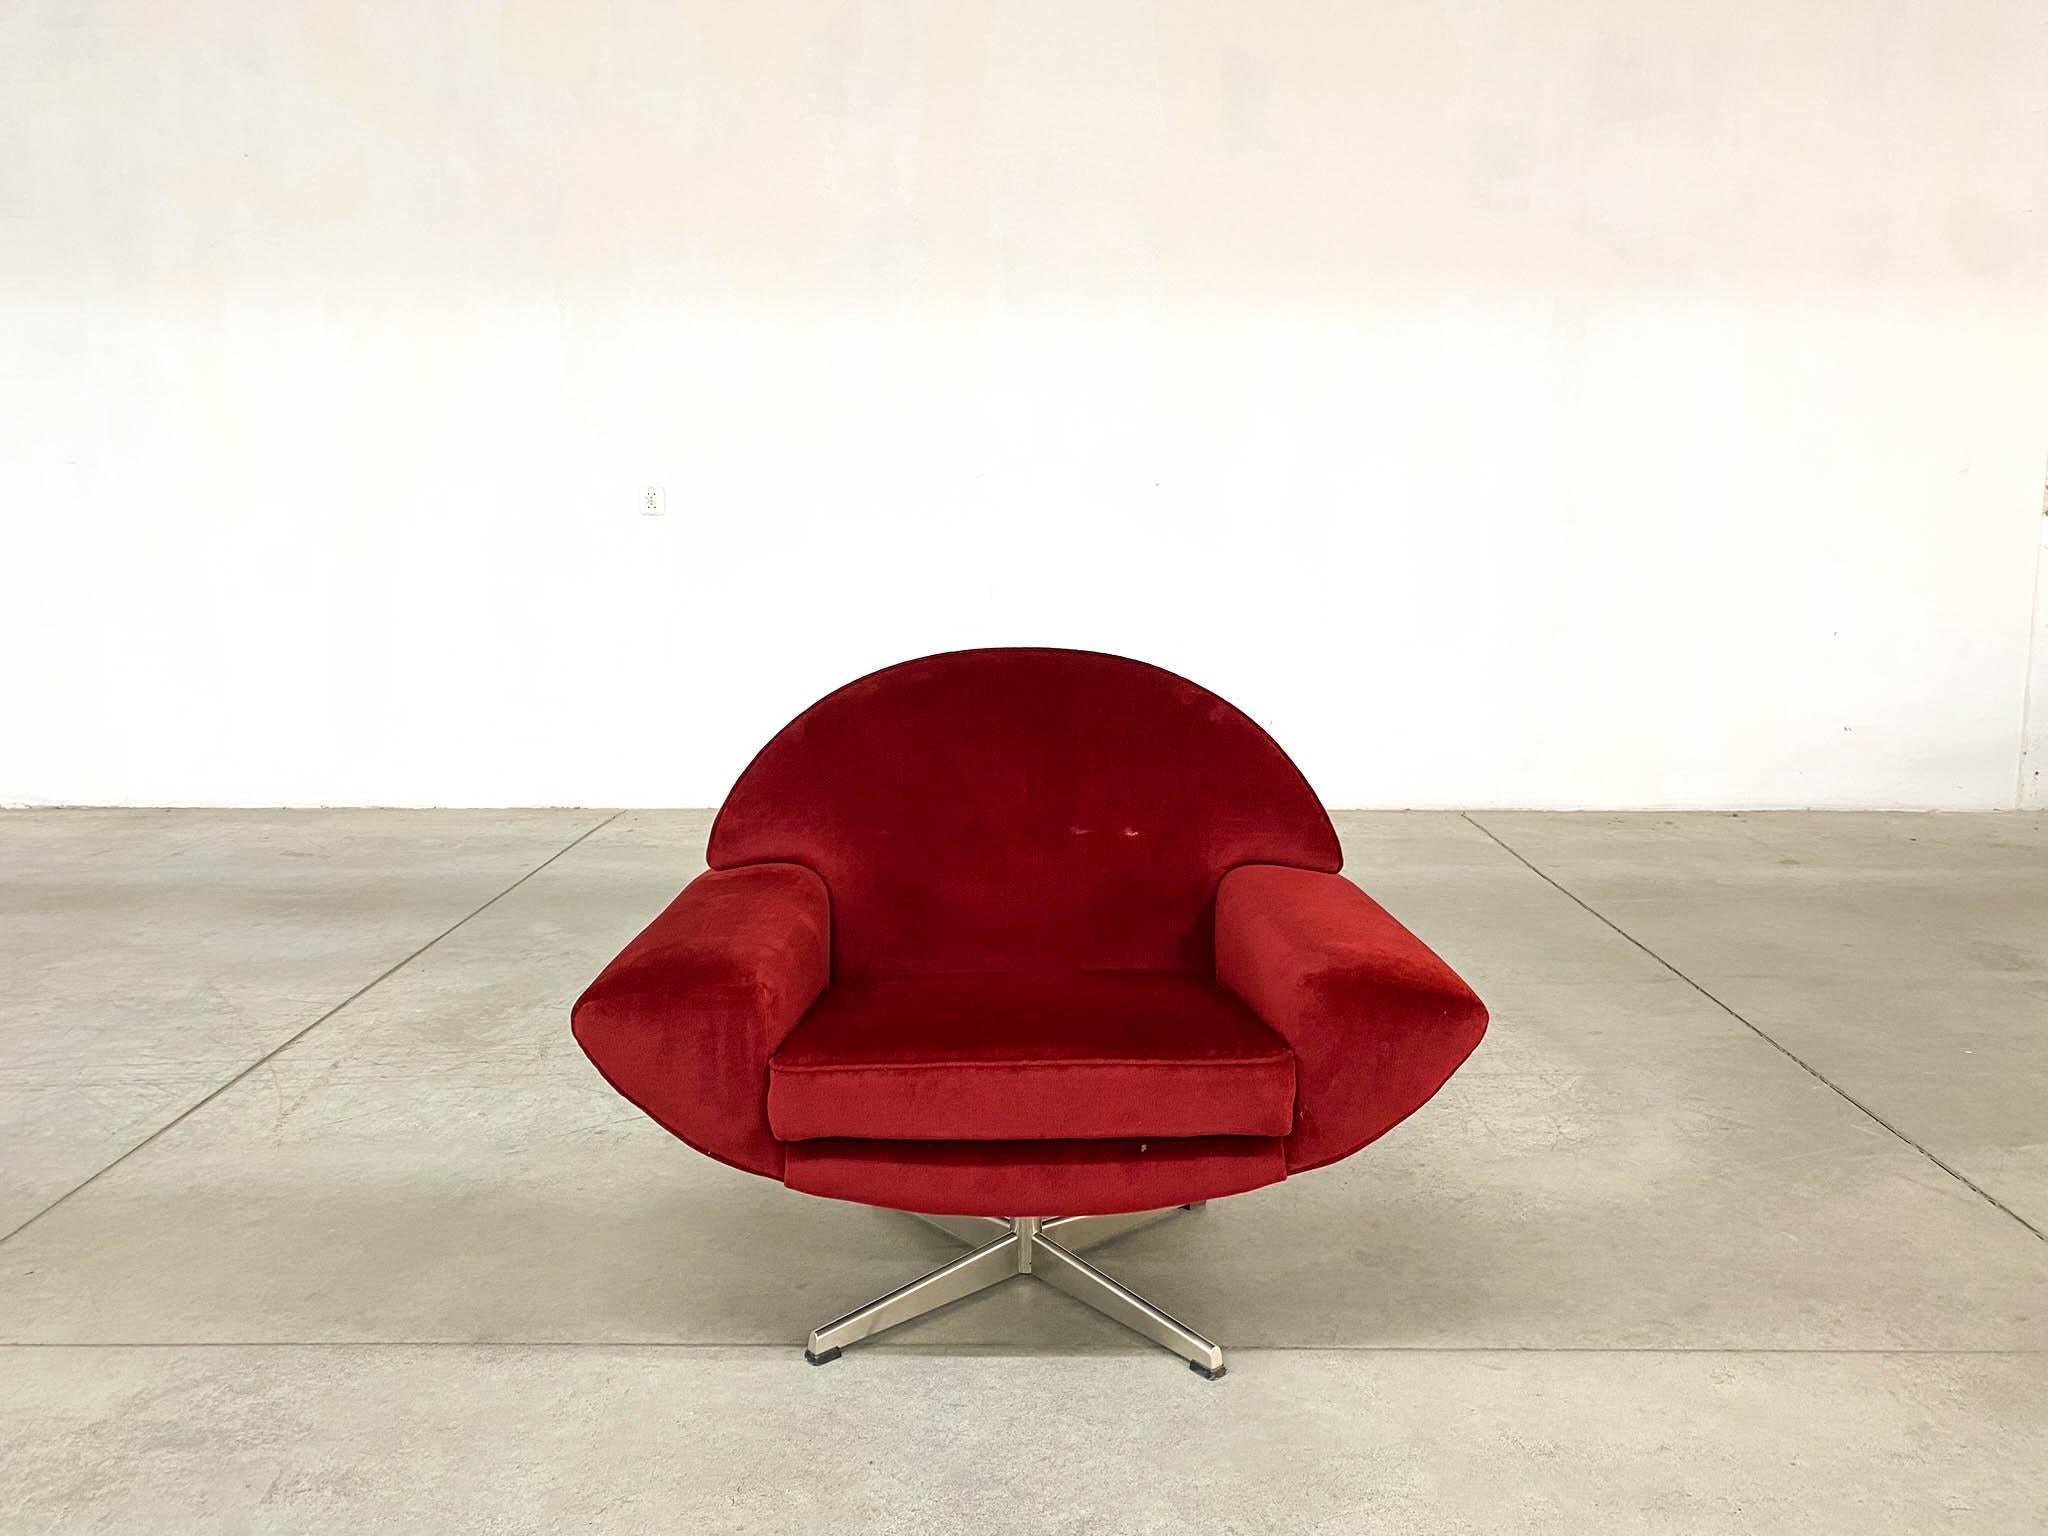 The Capri Andersen swivel armchair, designed by Johannes Andersen and manufactured by AB Trensums Fåtöljfabrik, embodies the quintessence of Mid-Century style. Crafted in Sweden during the design period of 1960 to 1969, this piece showcases the